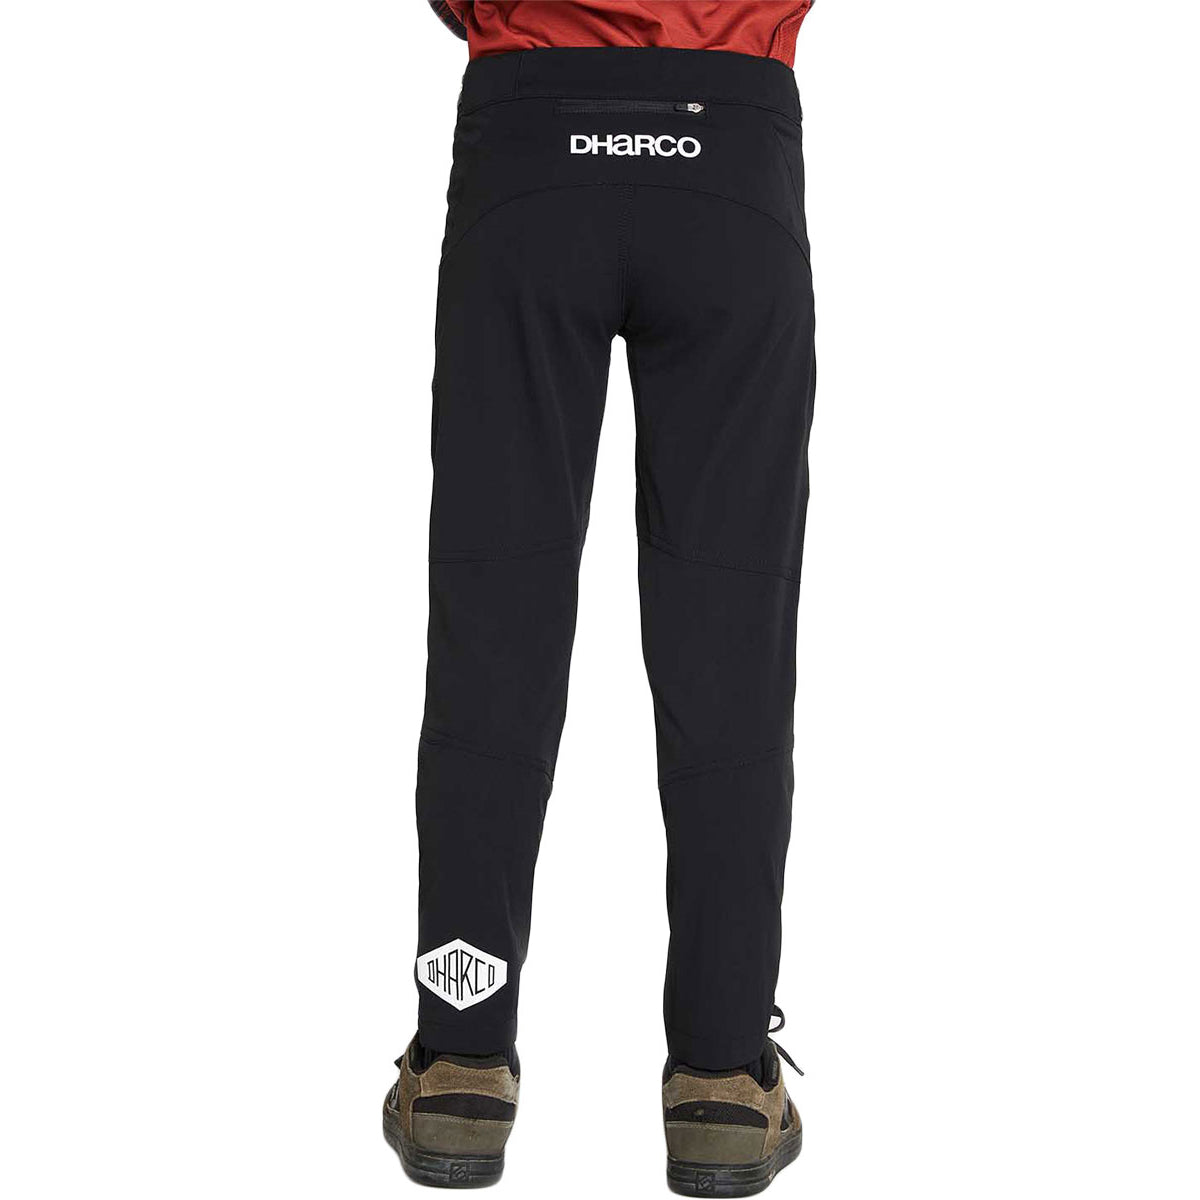 DHaRCO Youth Gravity Pants - Youth 2XL - Black